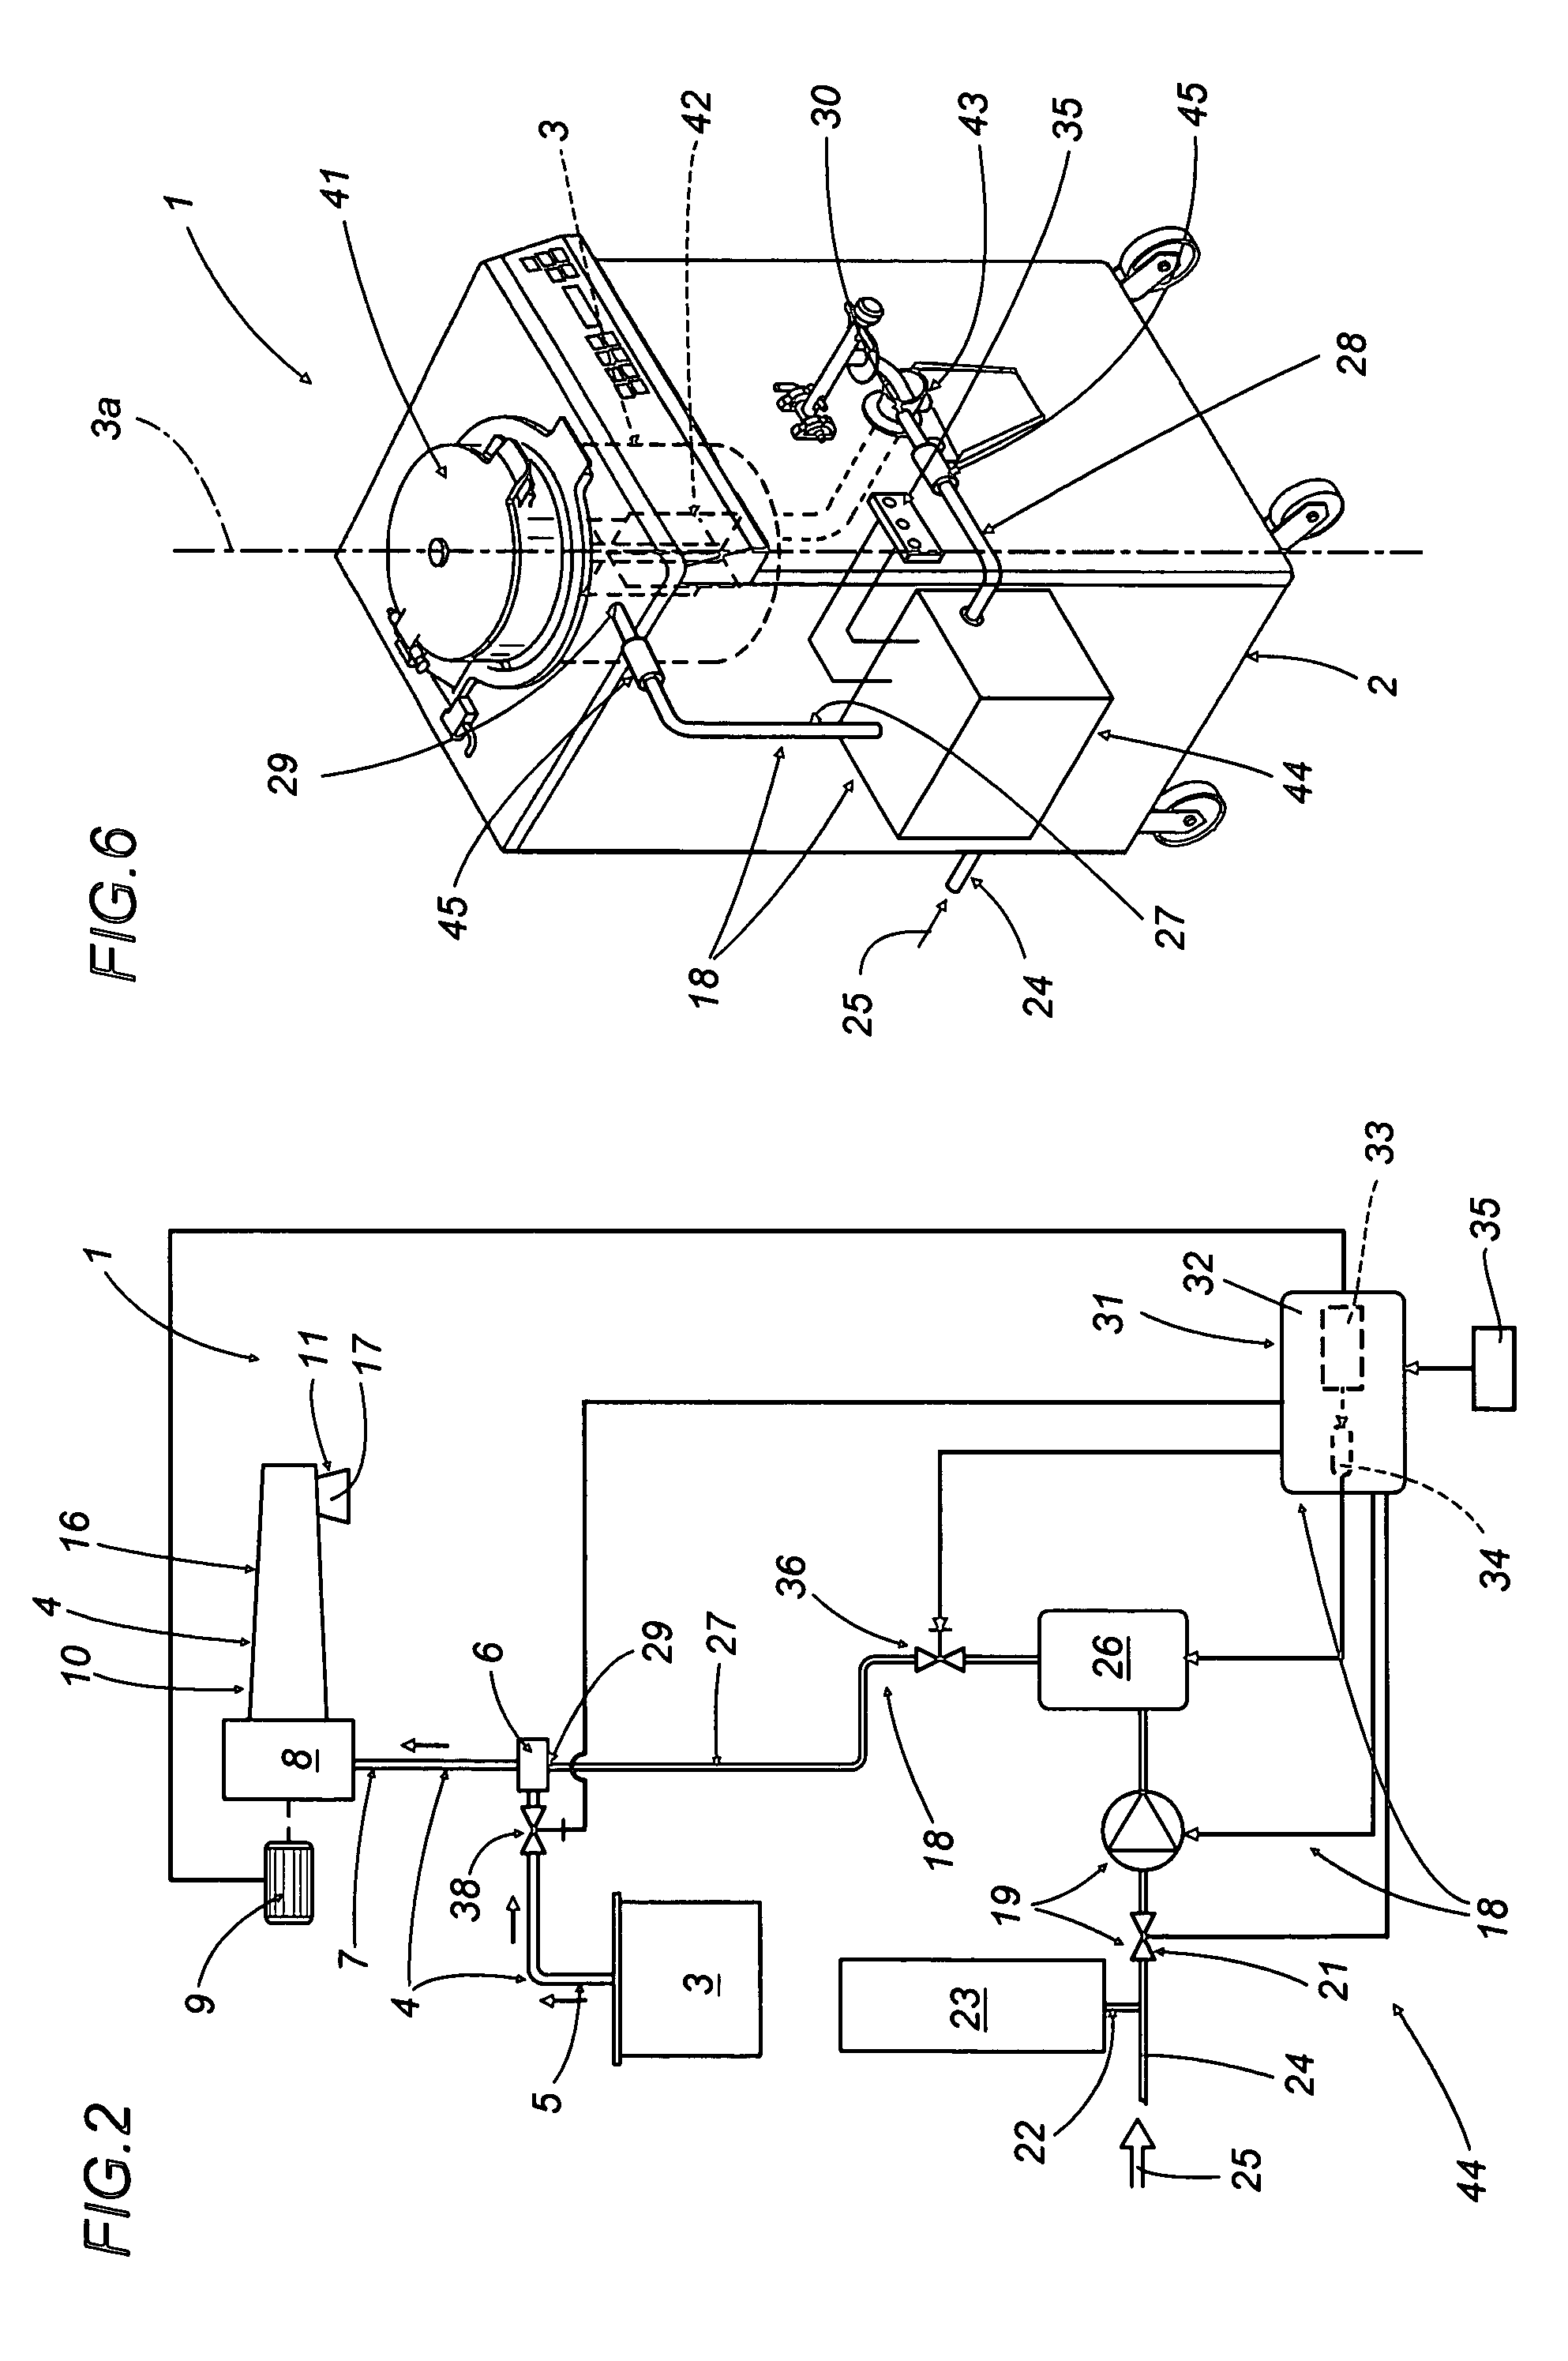 Machine and method for producing and dispensing liquid or semi-liquid consumer food products